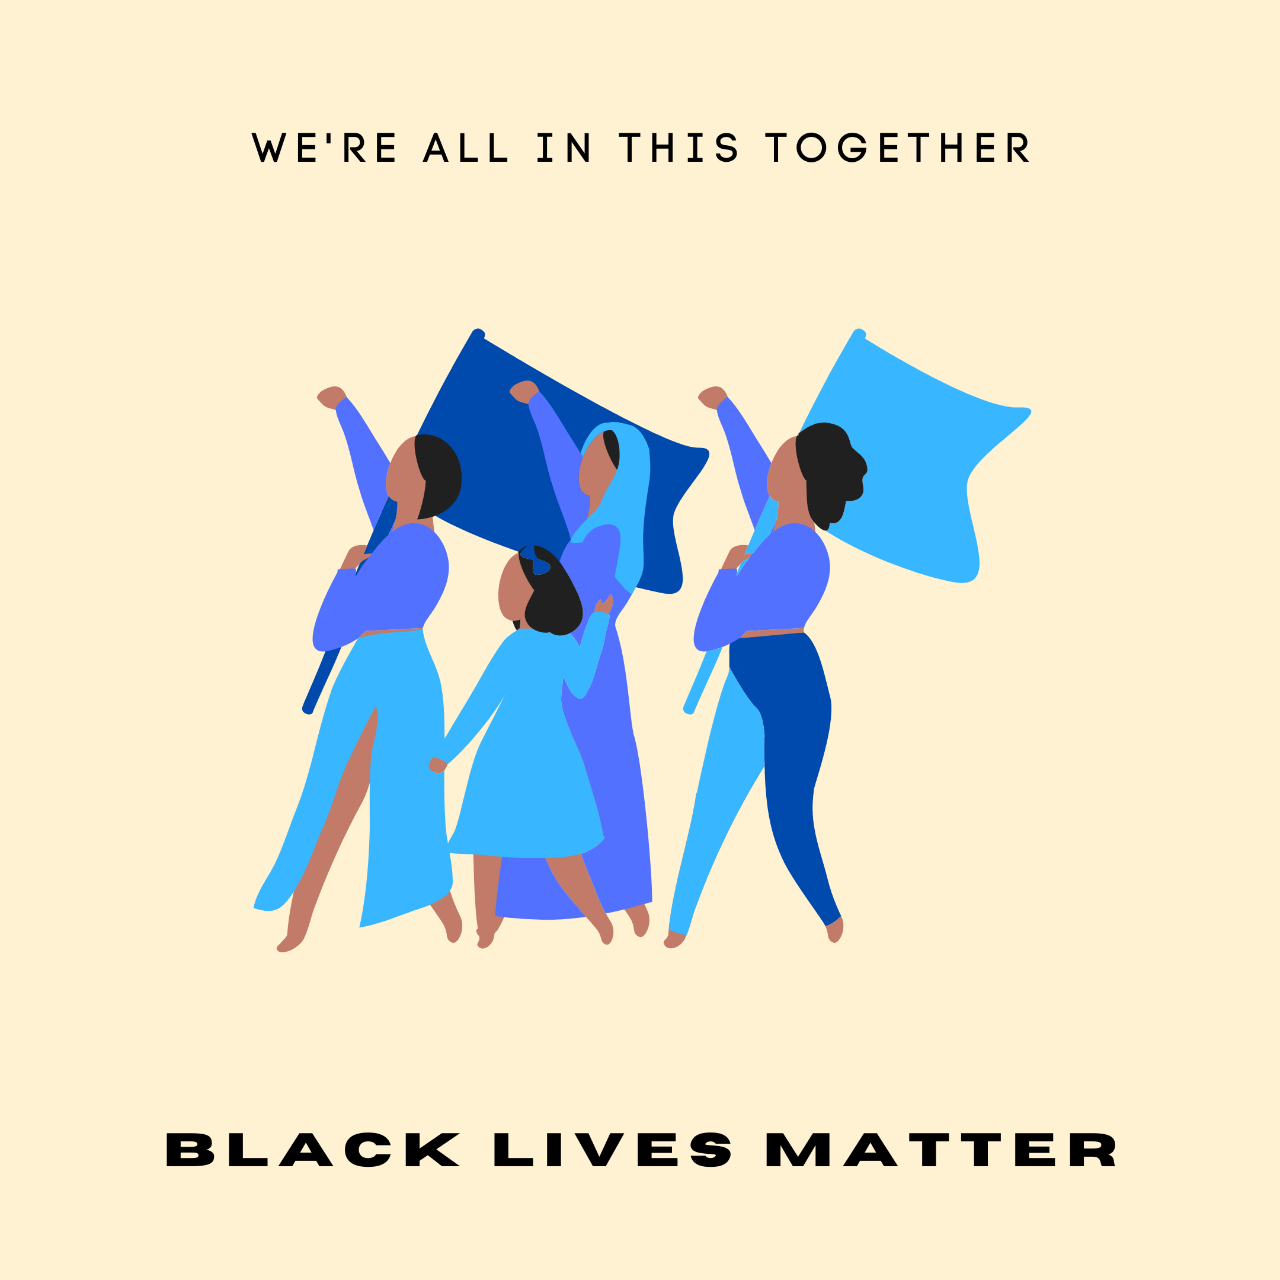 A graphic that features text that says "We're all this together" and "Black Lives Matter"